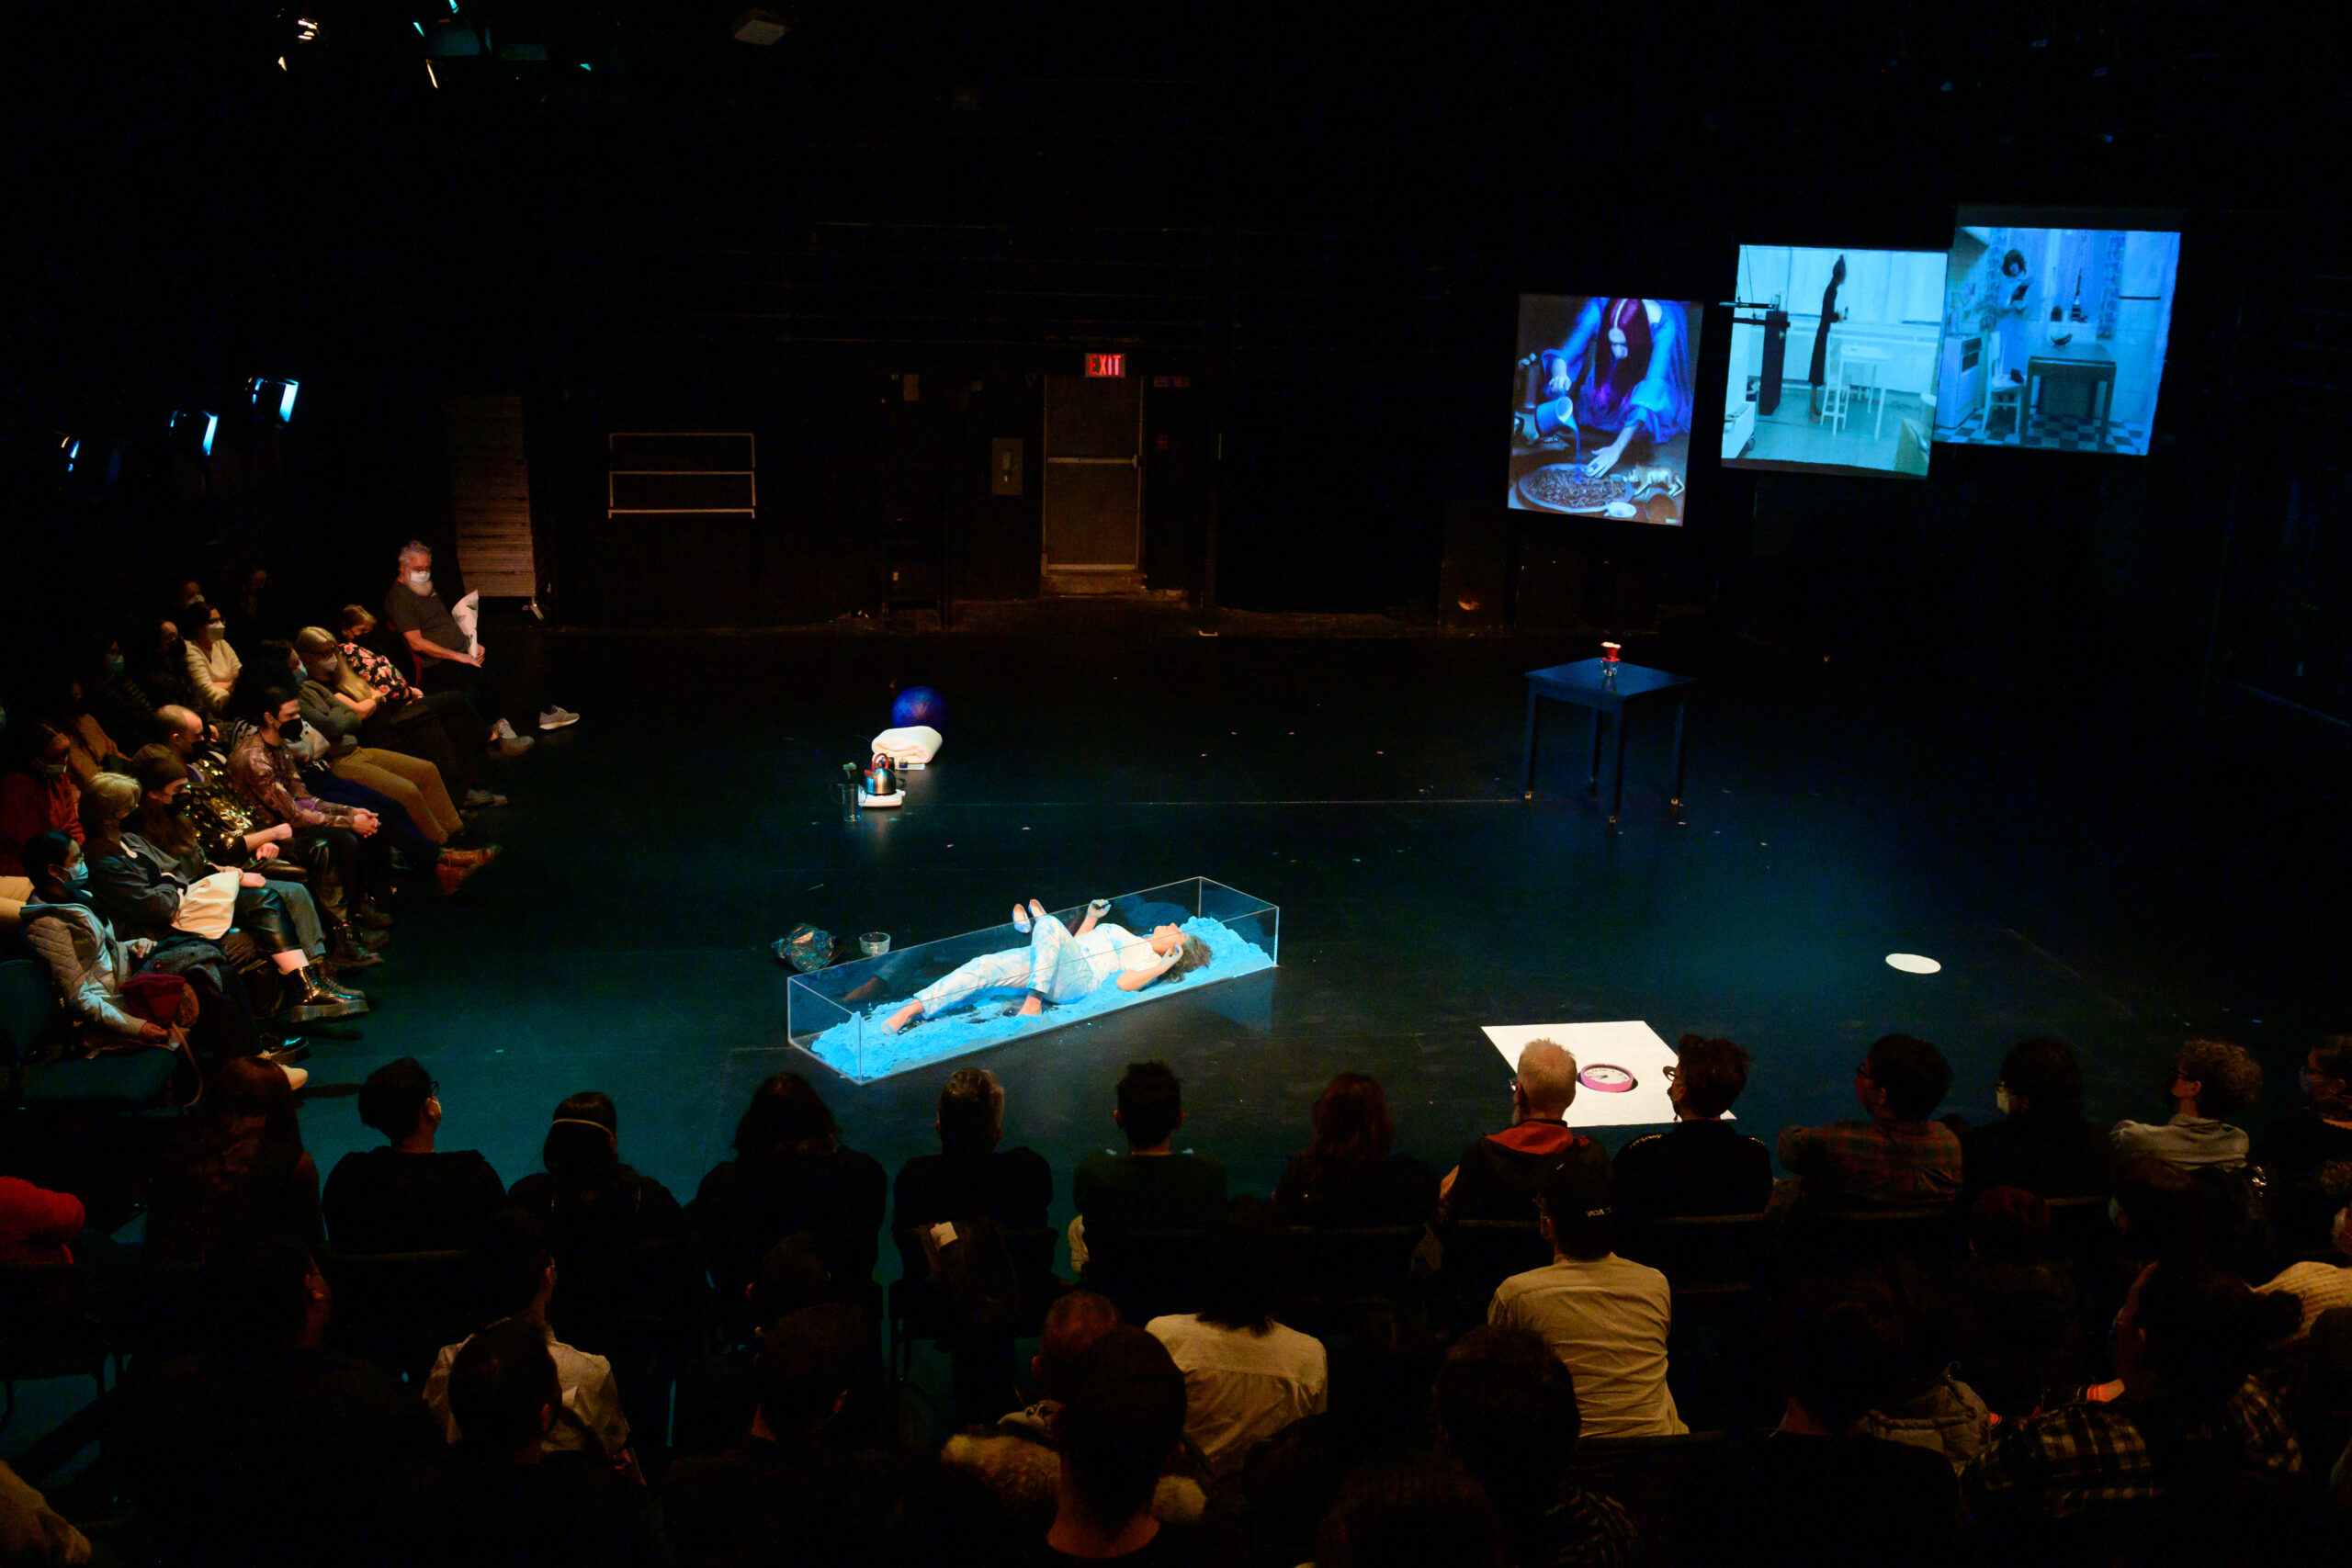 Image of performer in a glass rectangle container on stage. The performer is wearing all white, and is lying in a bright blue powder. A kettle, blanket, and ball sit on the stage floor behind the performer, as well as a small black table with a coffee mug and filter. In the background three large screens depict images of kitchen/housework. 